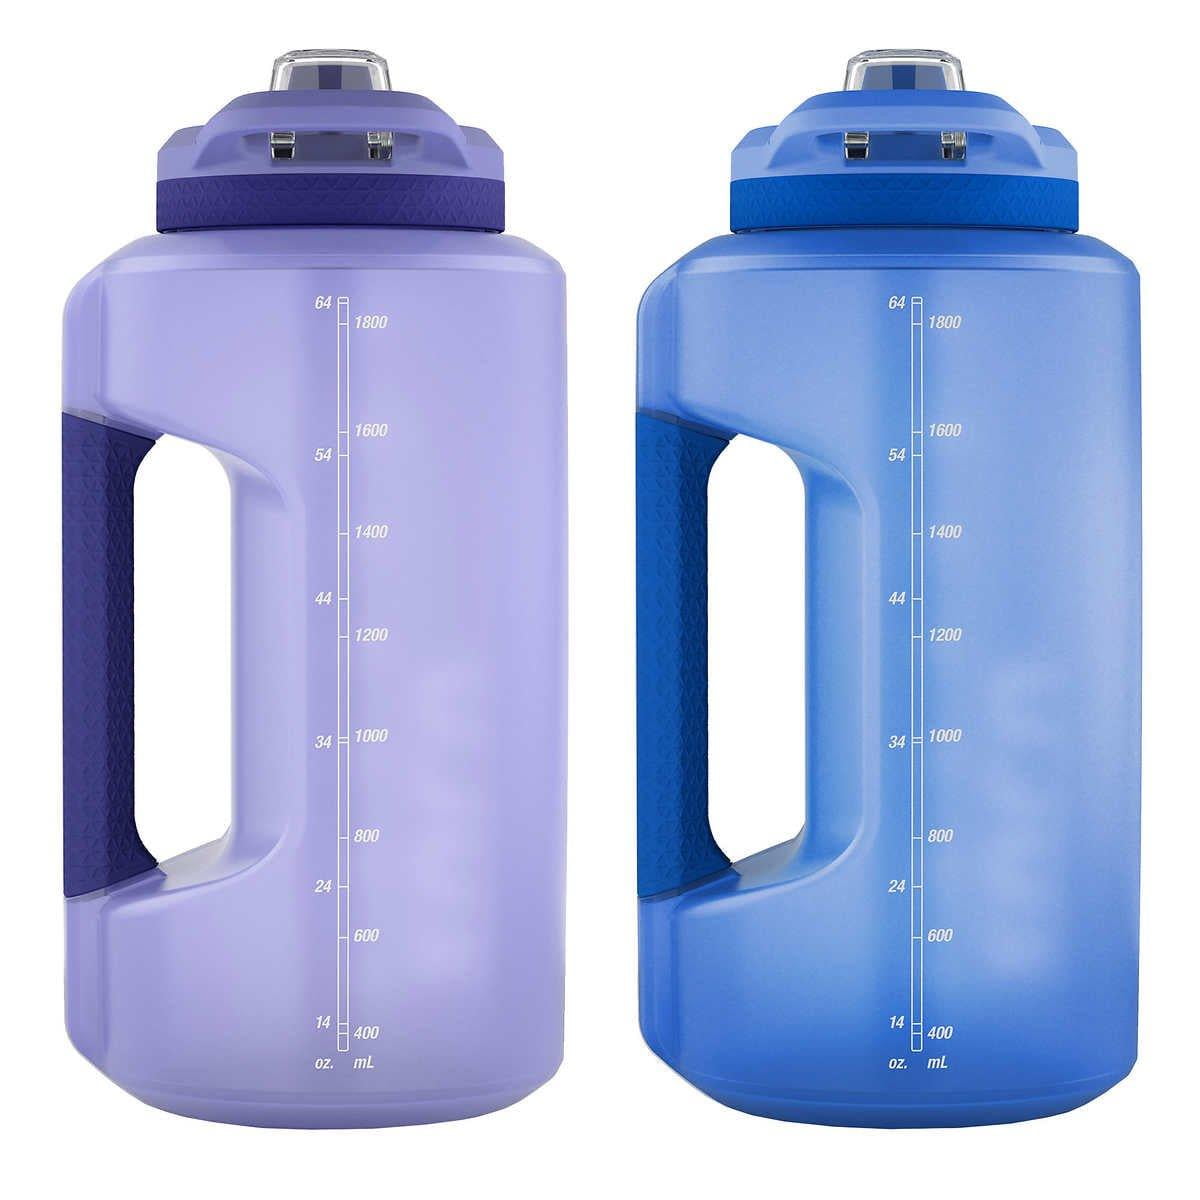 ZULU Stainless Insulated Water Bottle - 2 Pack, Assorted Colors